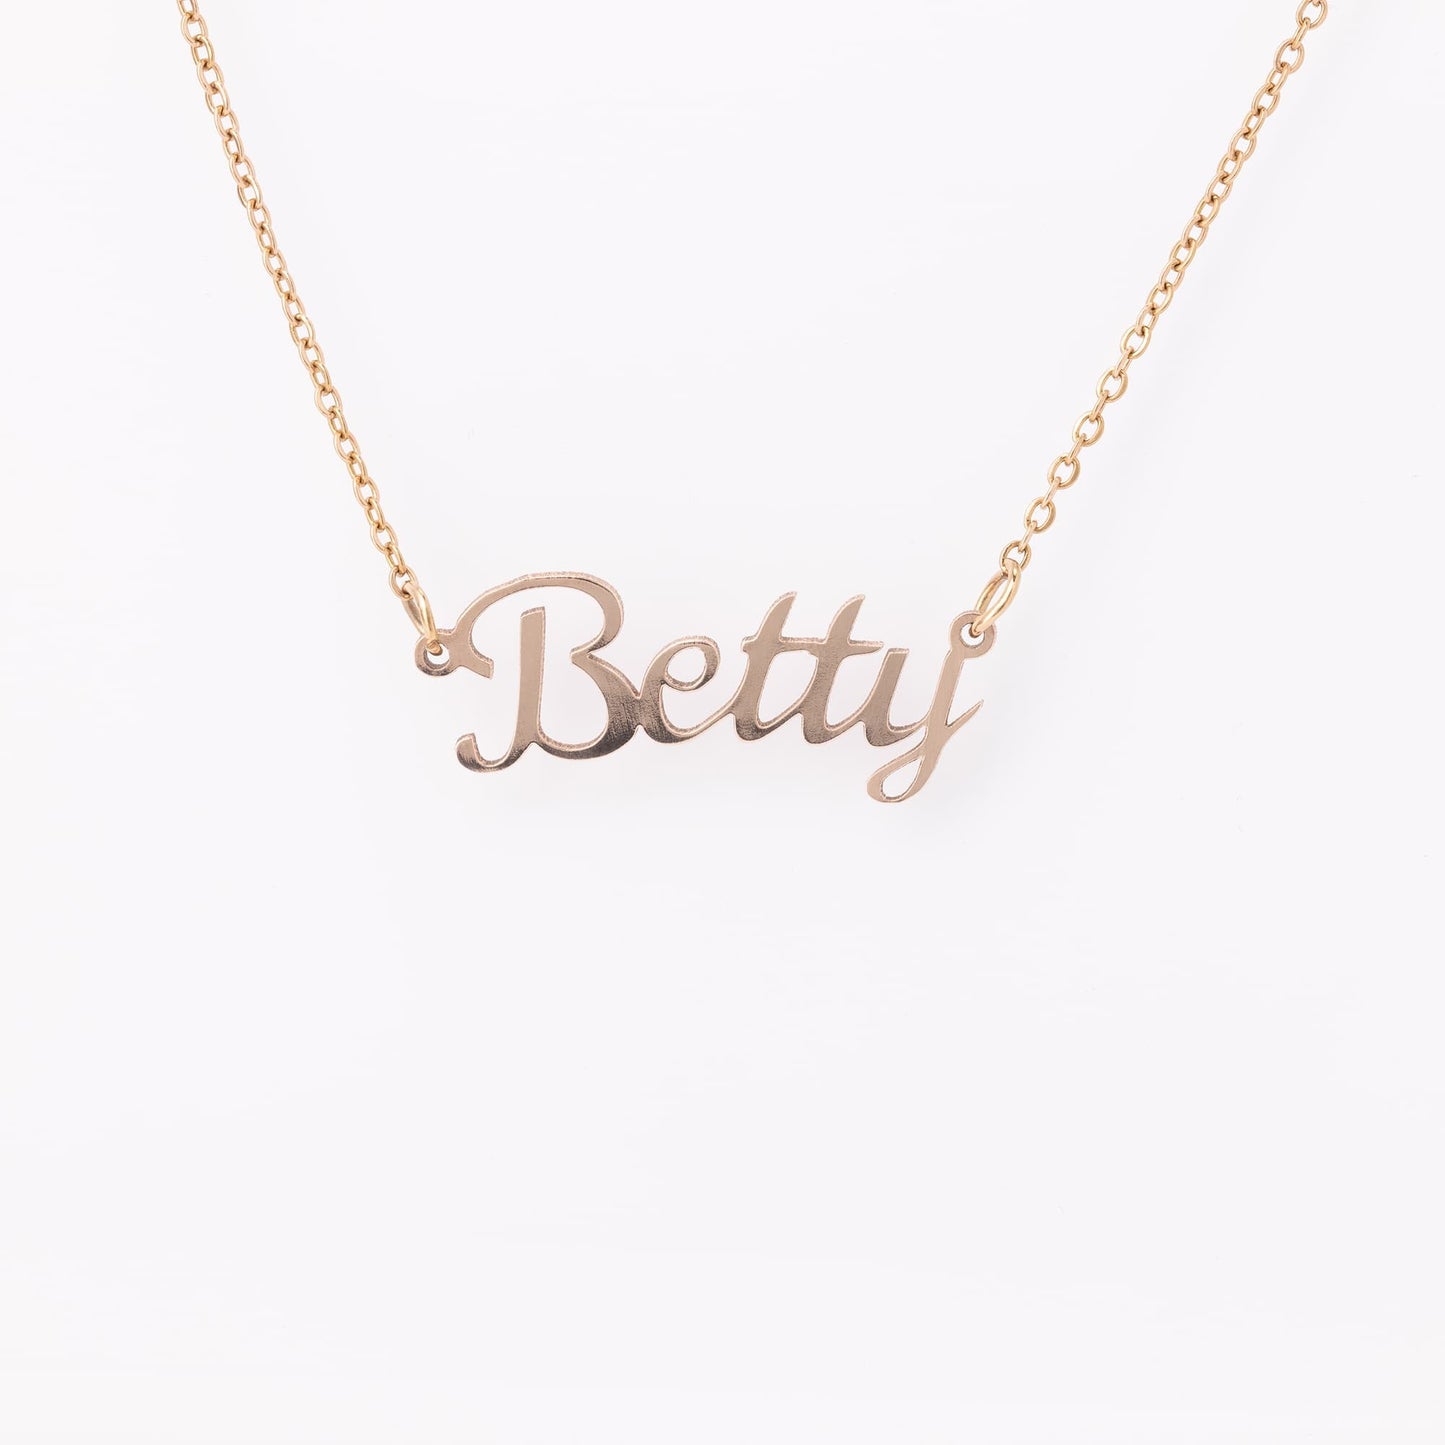 Personalized "Name Necklace" 17 inch Adjustable Chain